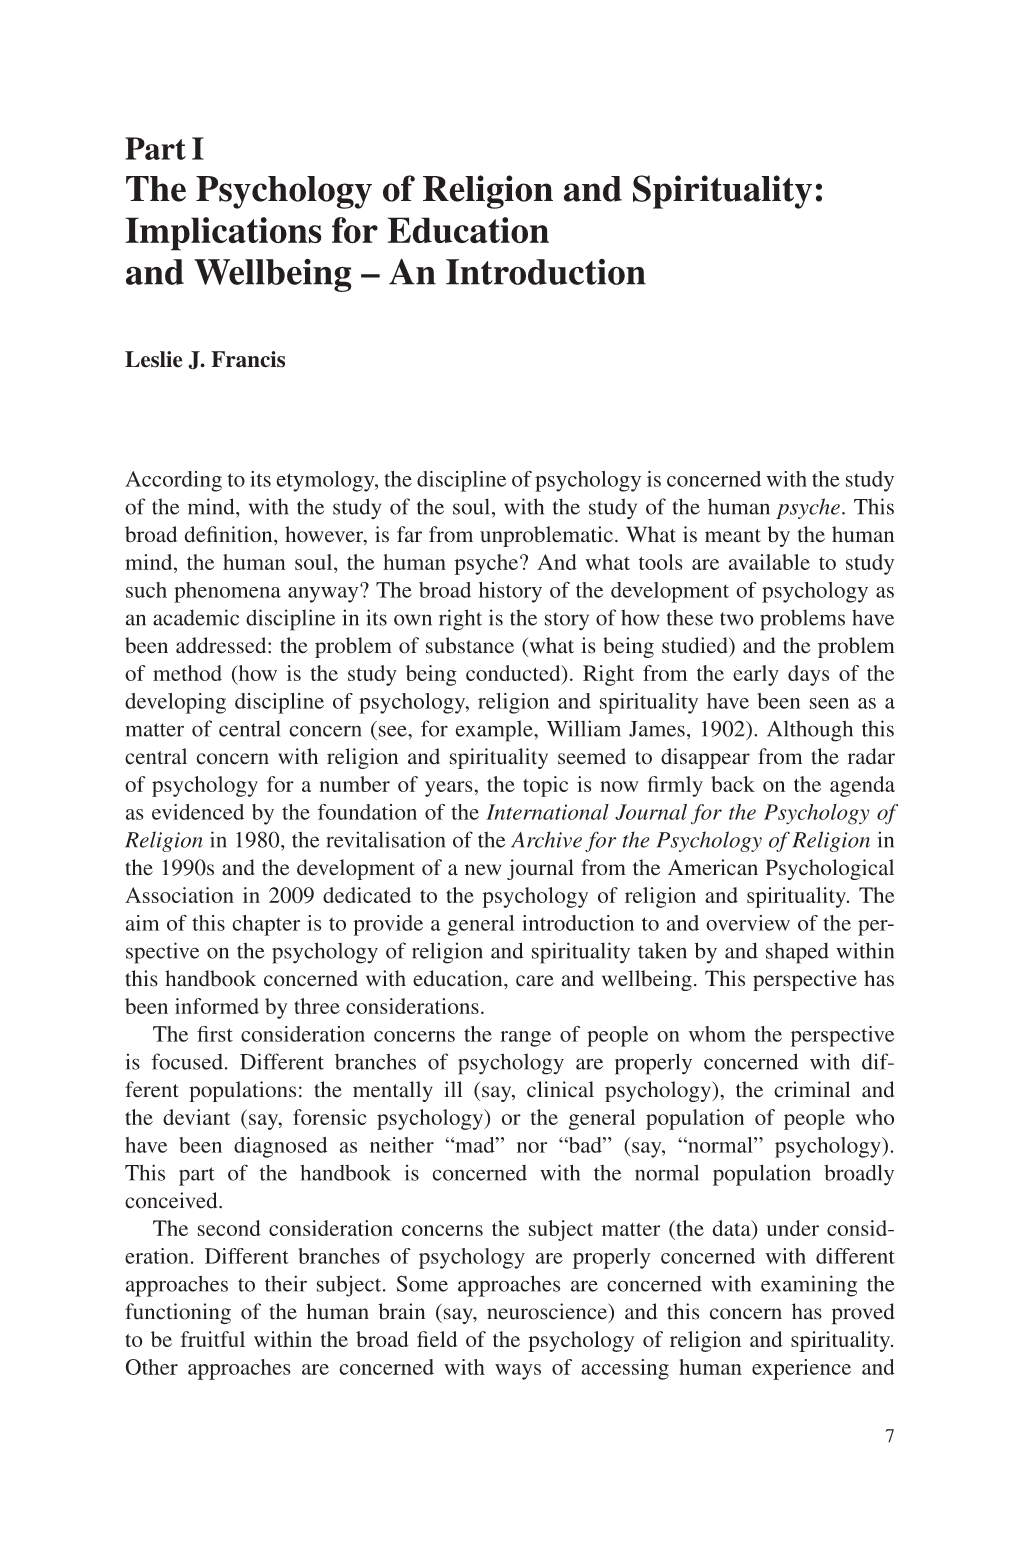 The Psychology of Religion and Spirituality: Implications for Education and Wellbeing – an Introduction